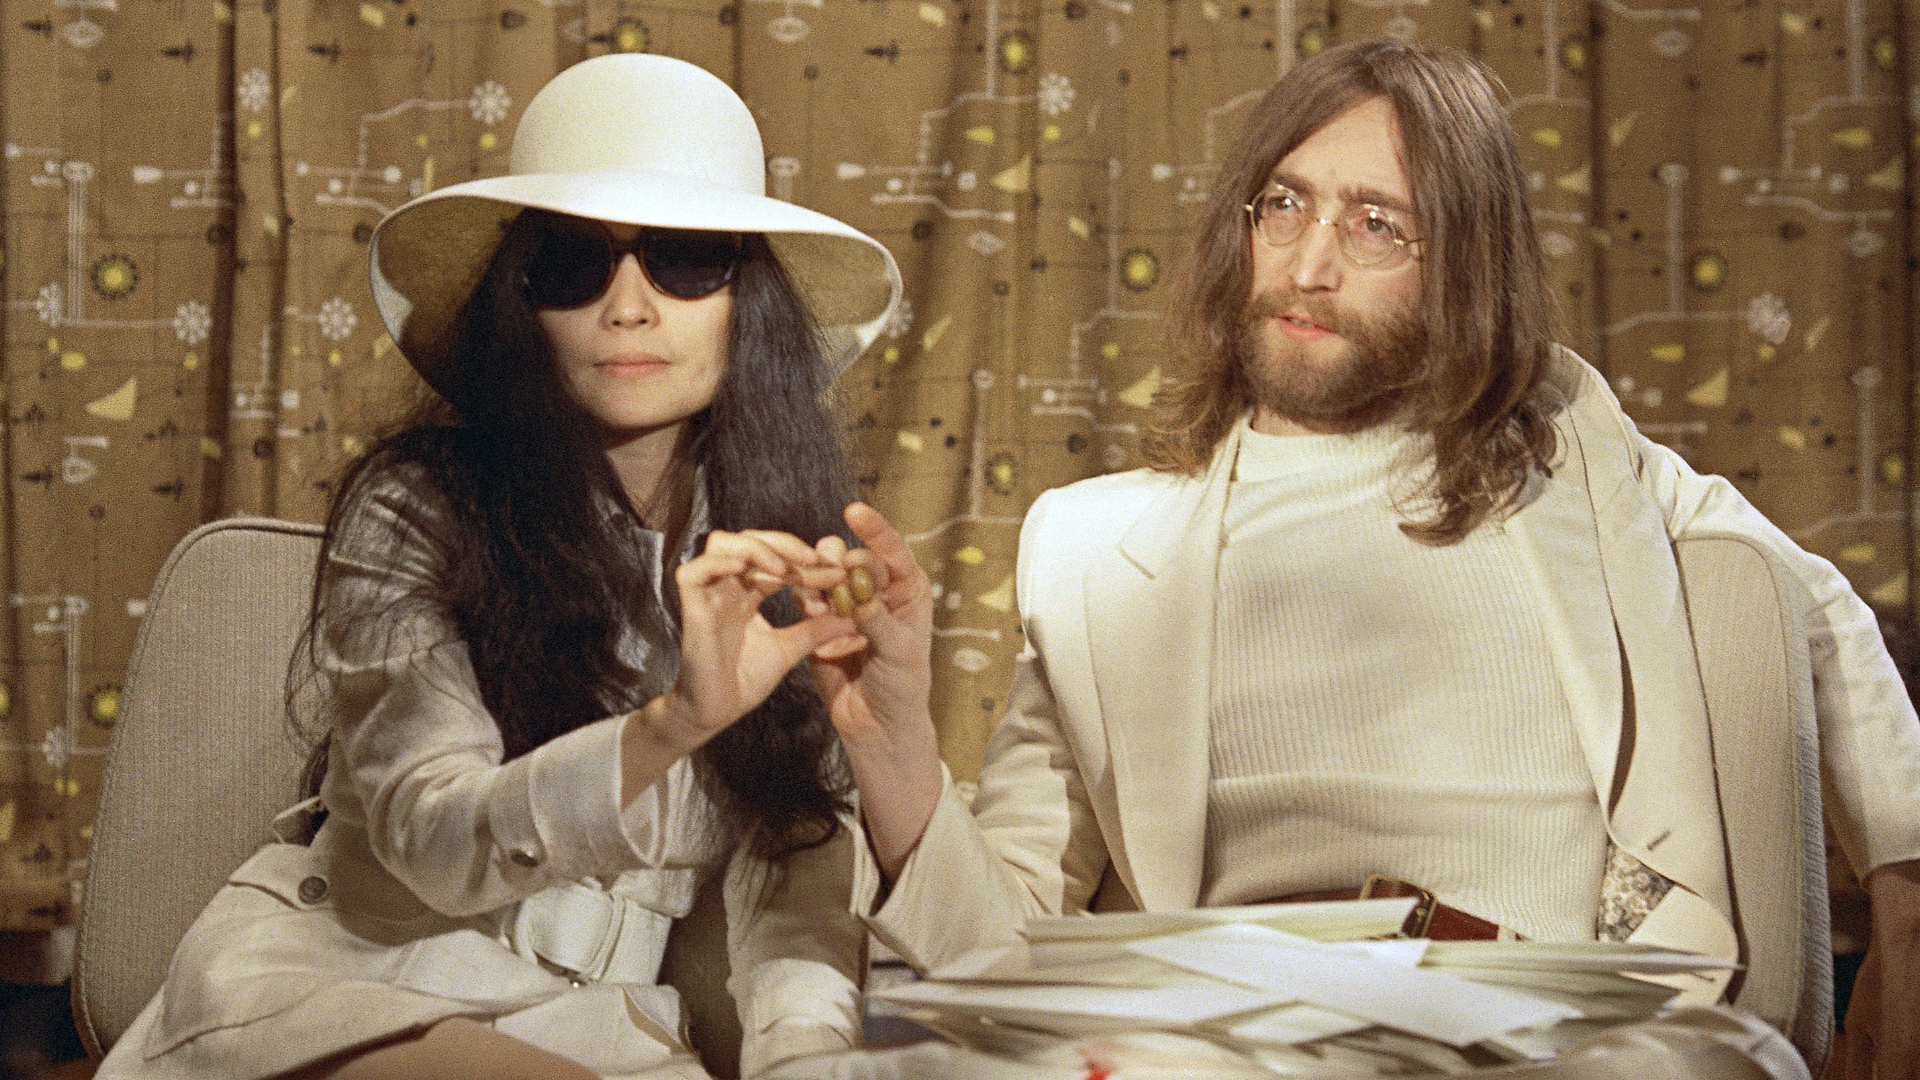 Archival Video of the Day John Lennon Was Killed